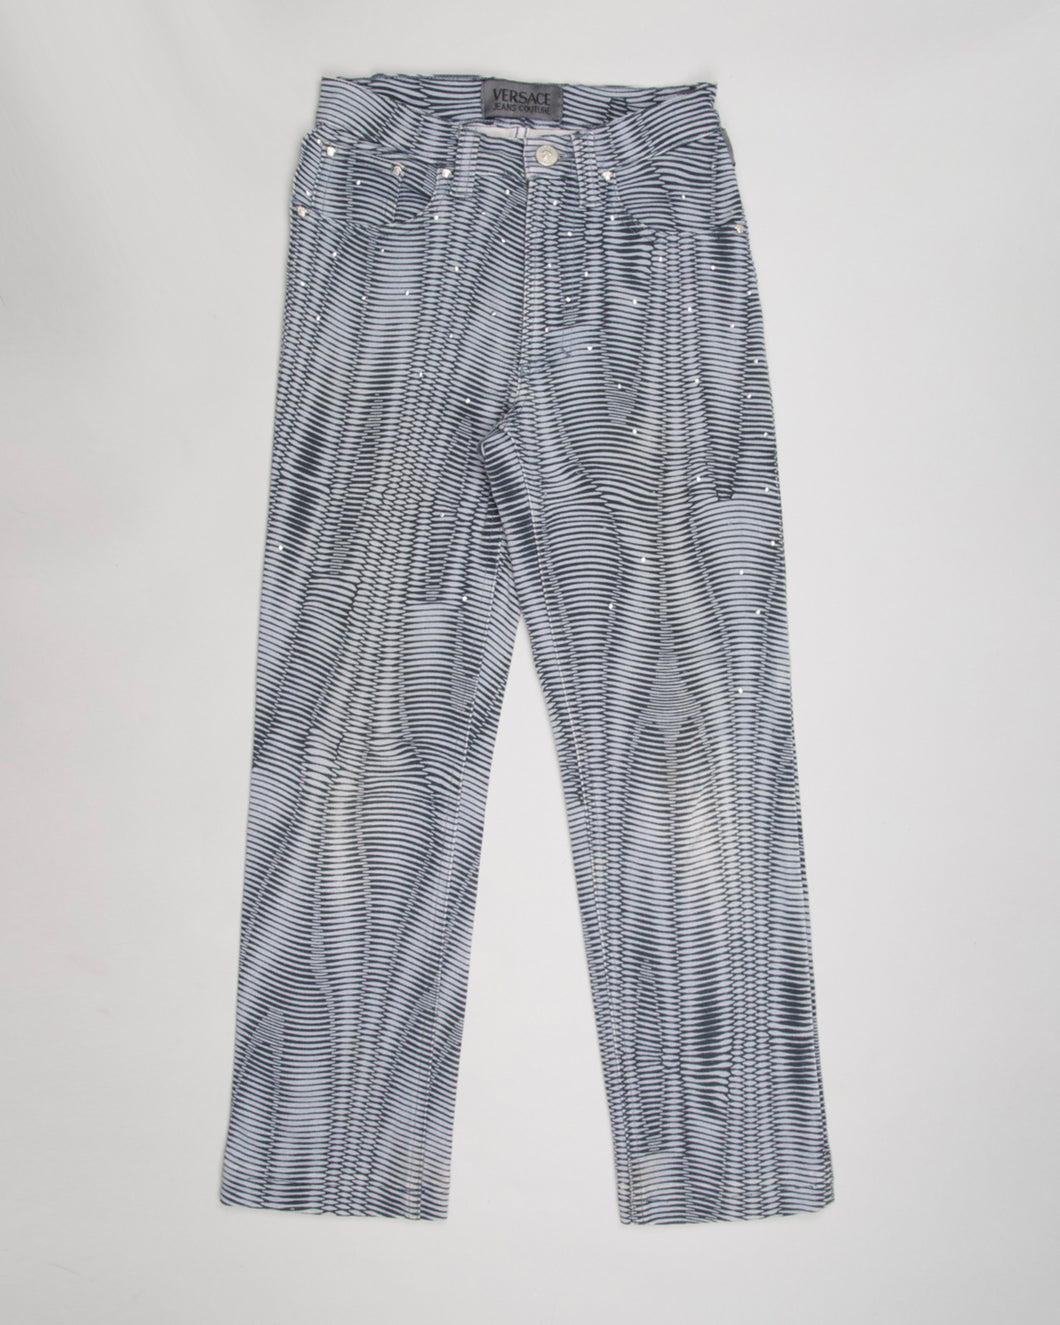 Versace blue grey abstract snakeprint pattern jeans